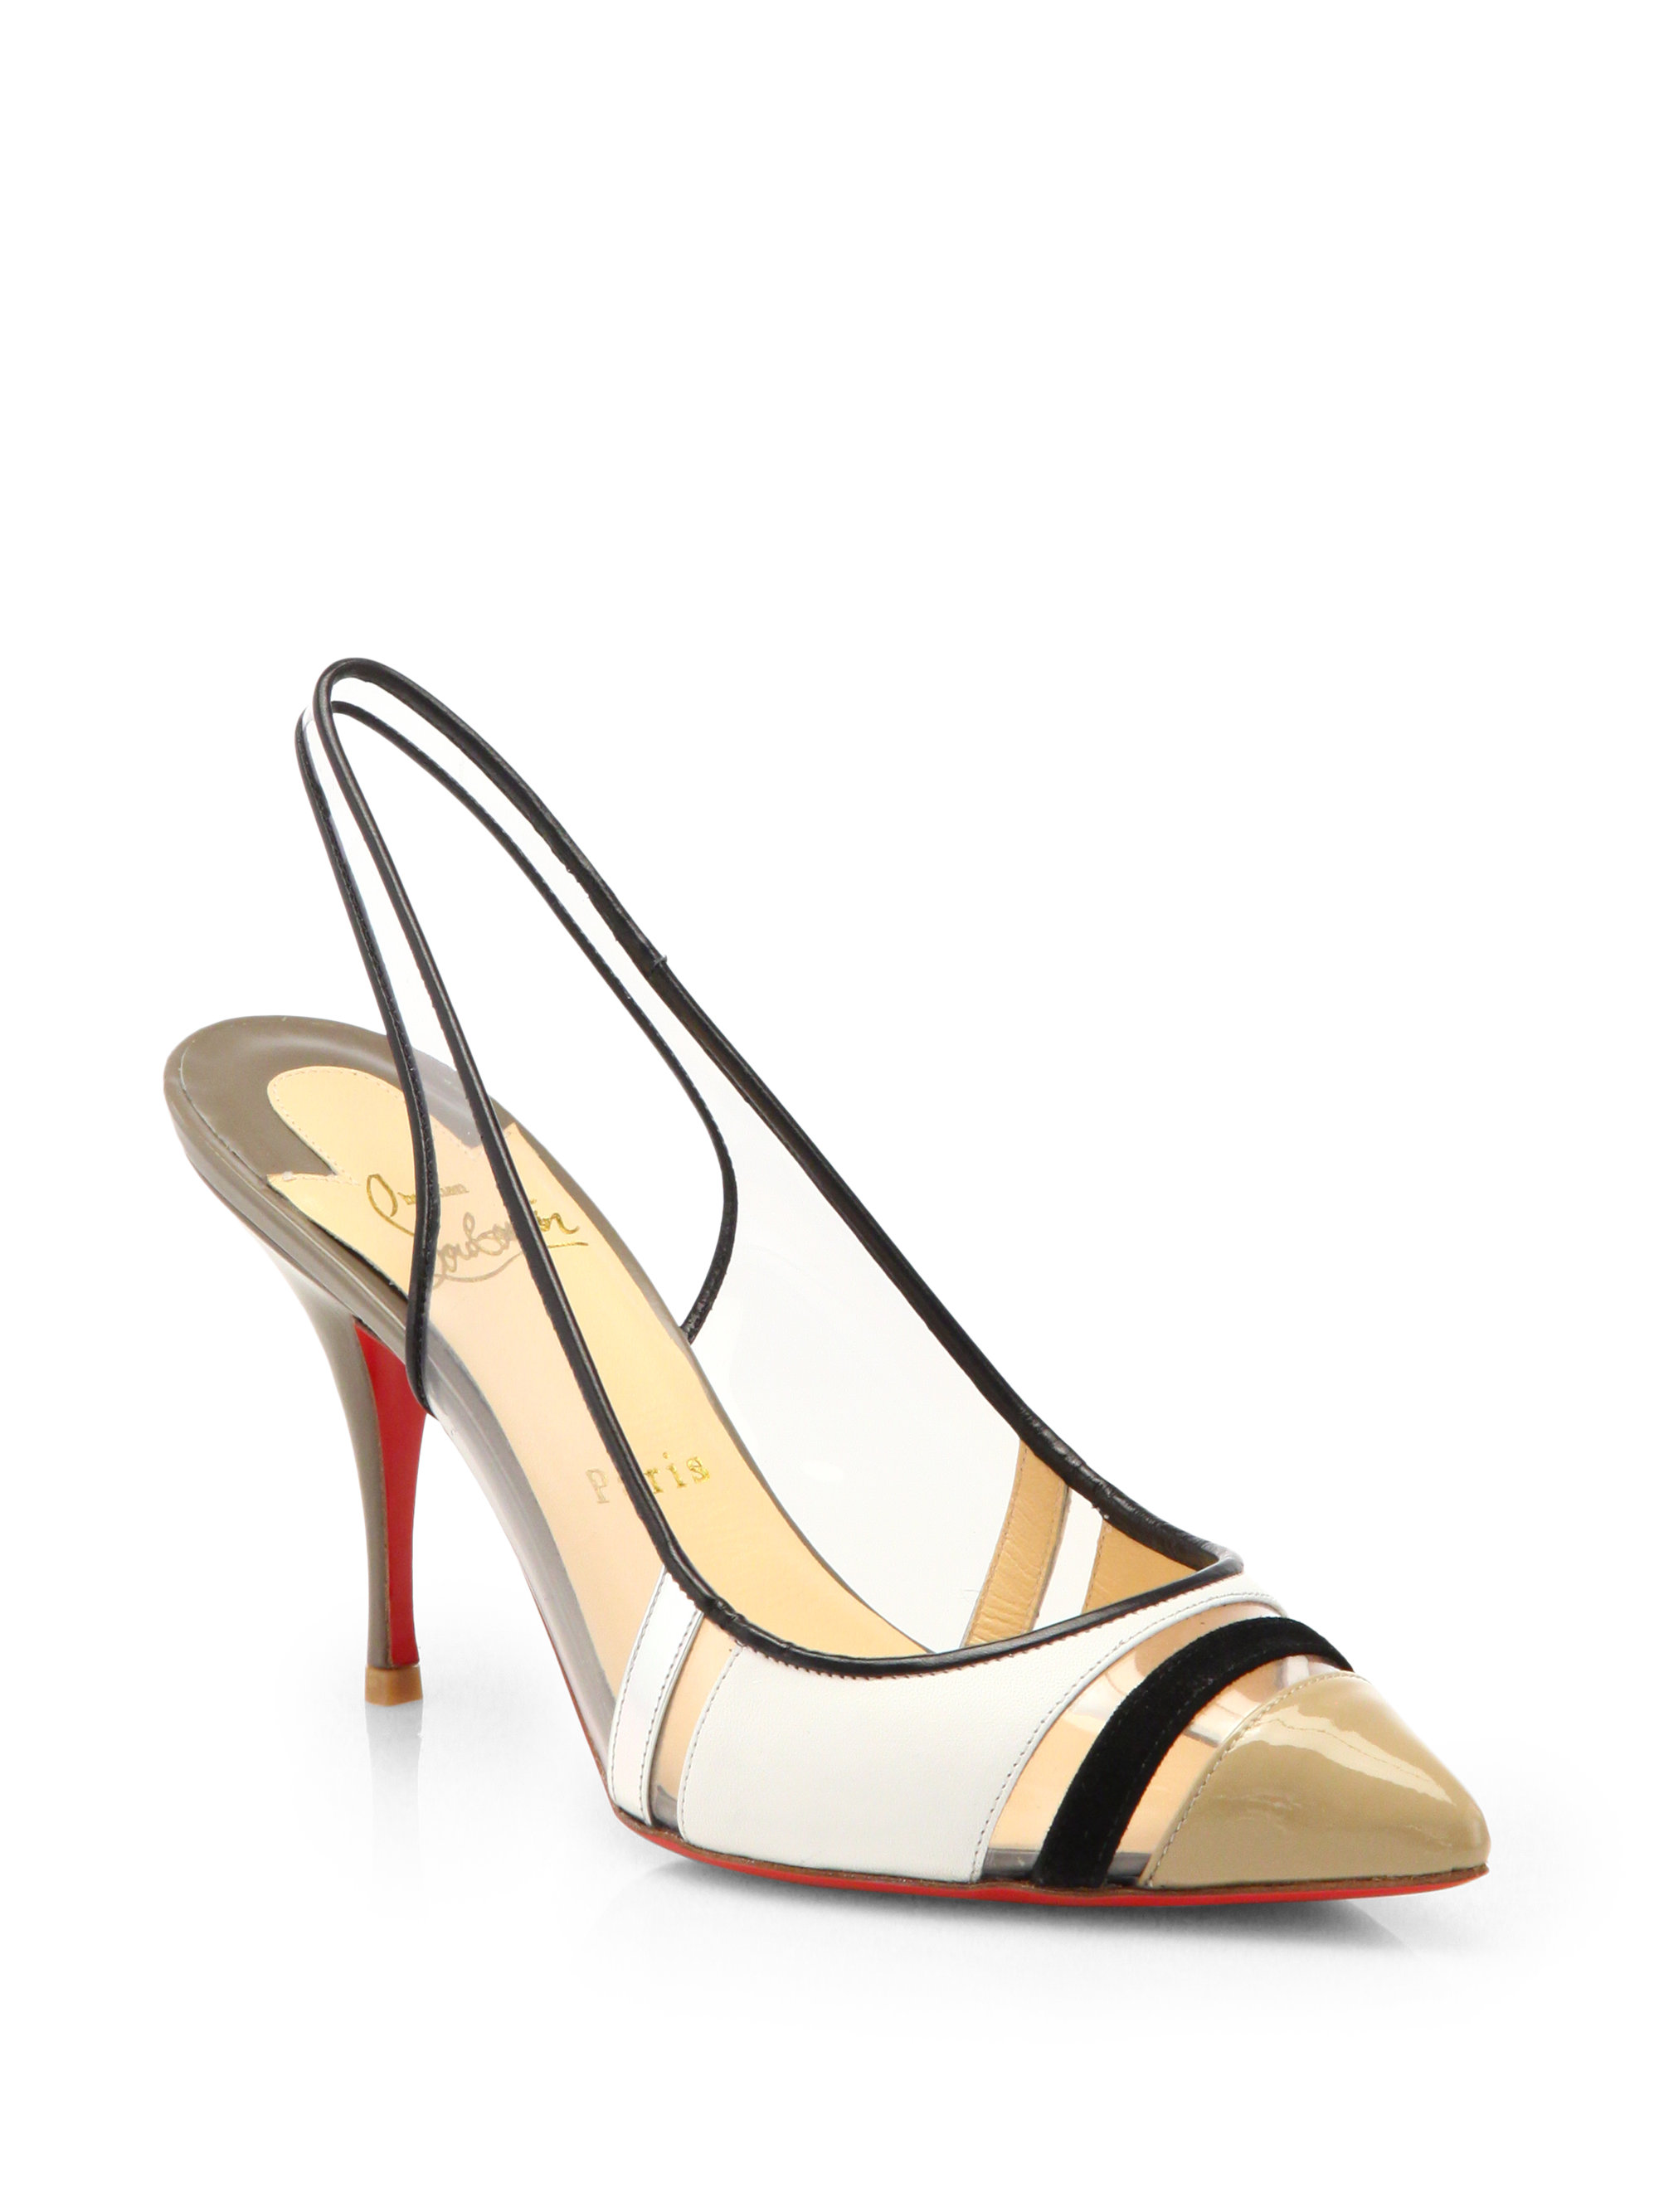 christian louboutin pumps Black and transparent leather trim | The ...